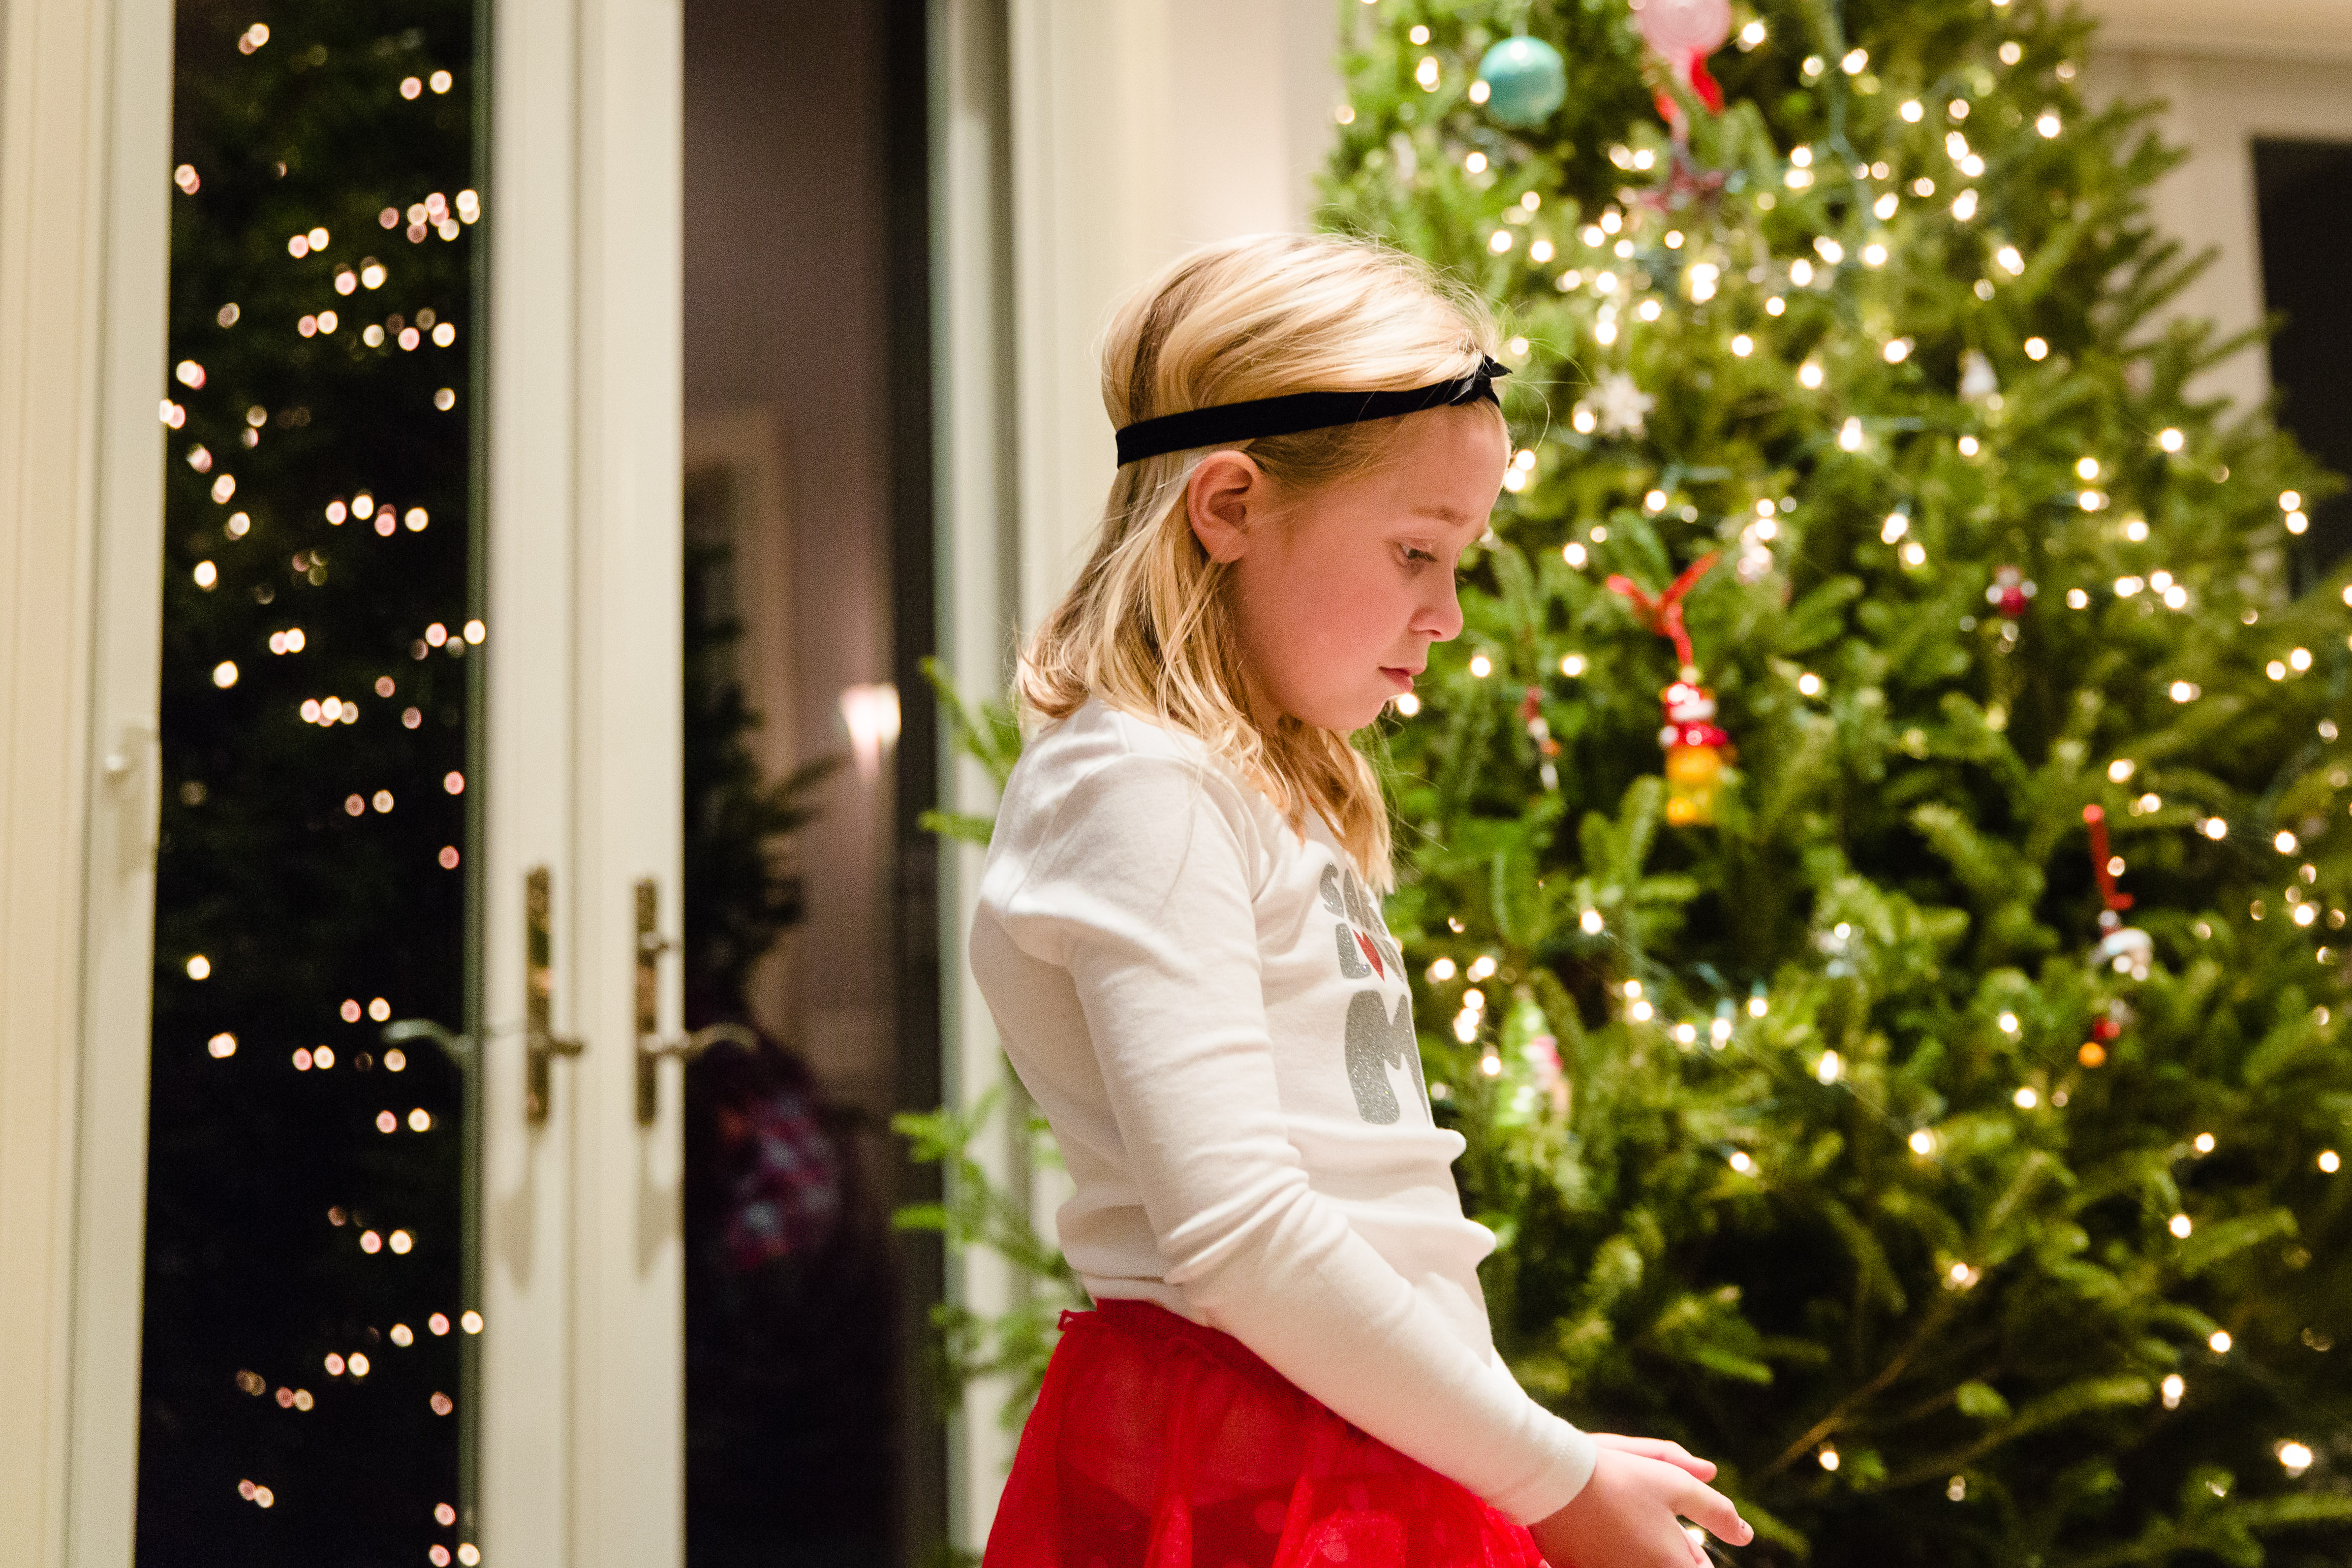 Little girl looking sad with christmas tree in background